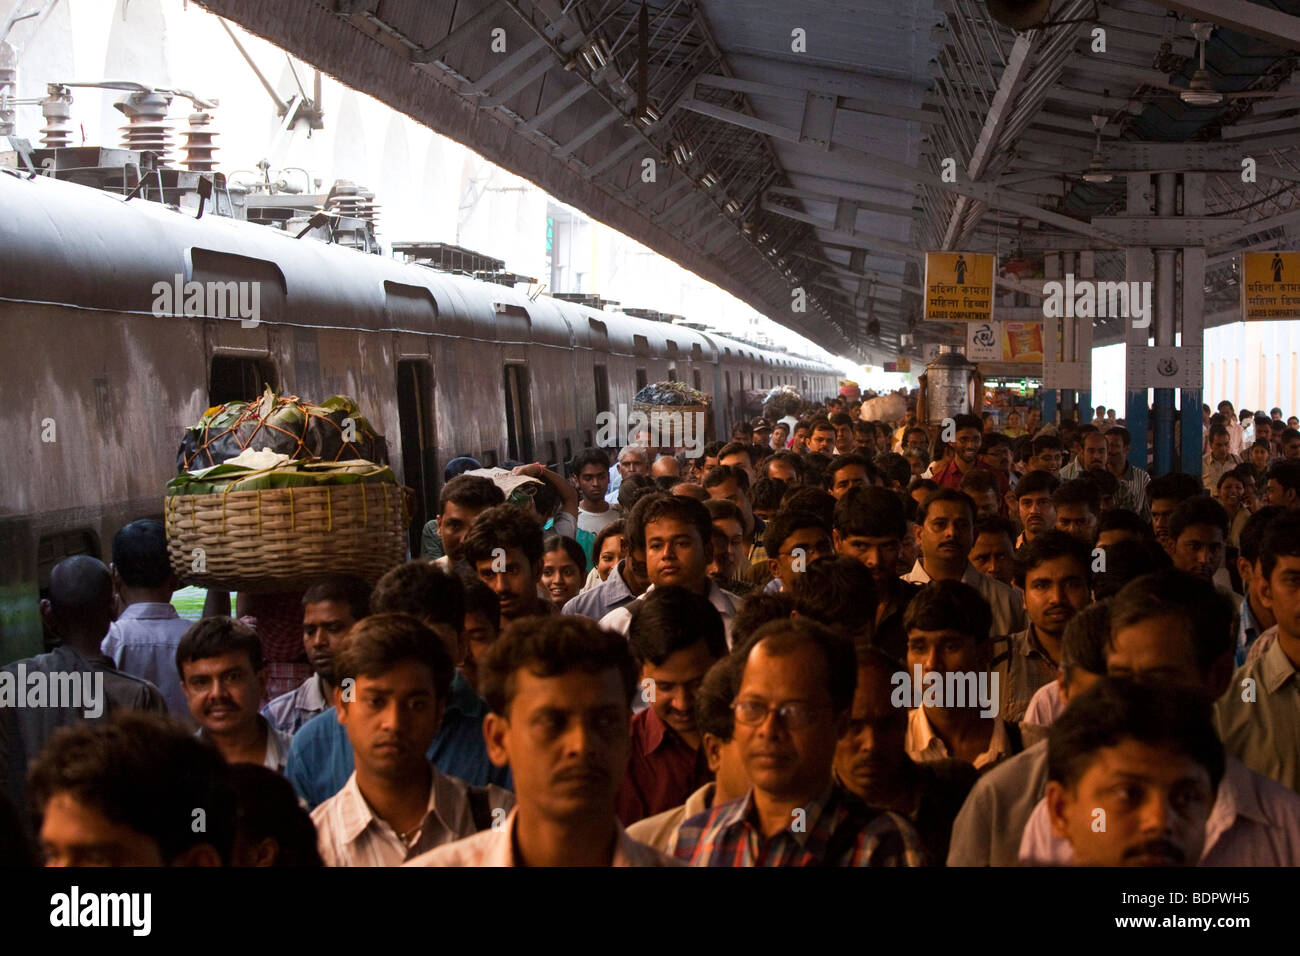 People Crowd the Platform to leave the Train at Sealdah Railway Station in Calcutta India Stock Photo